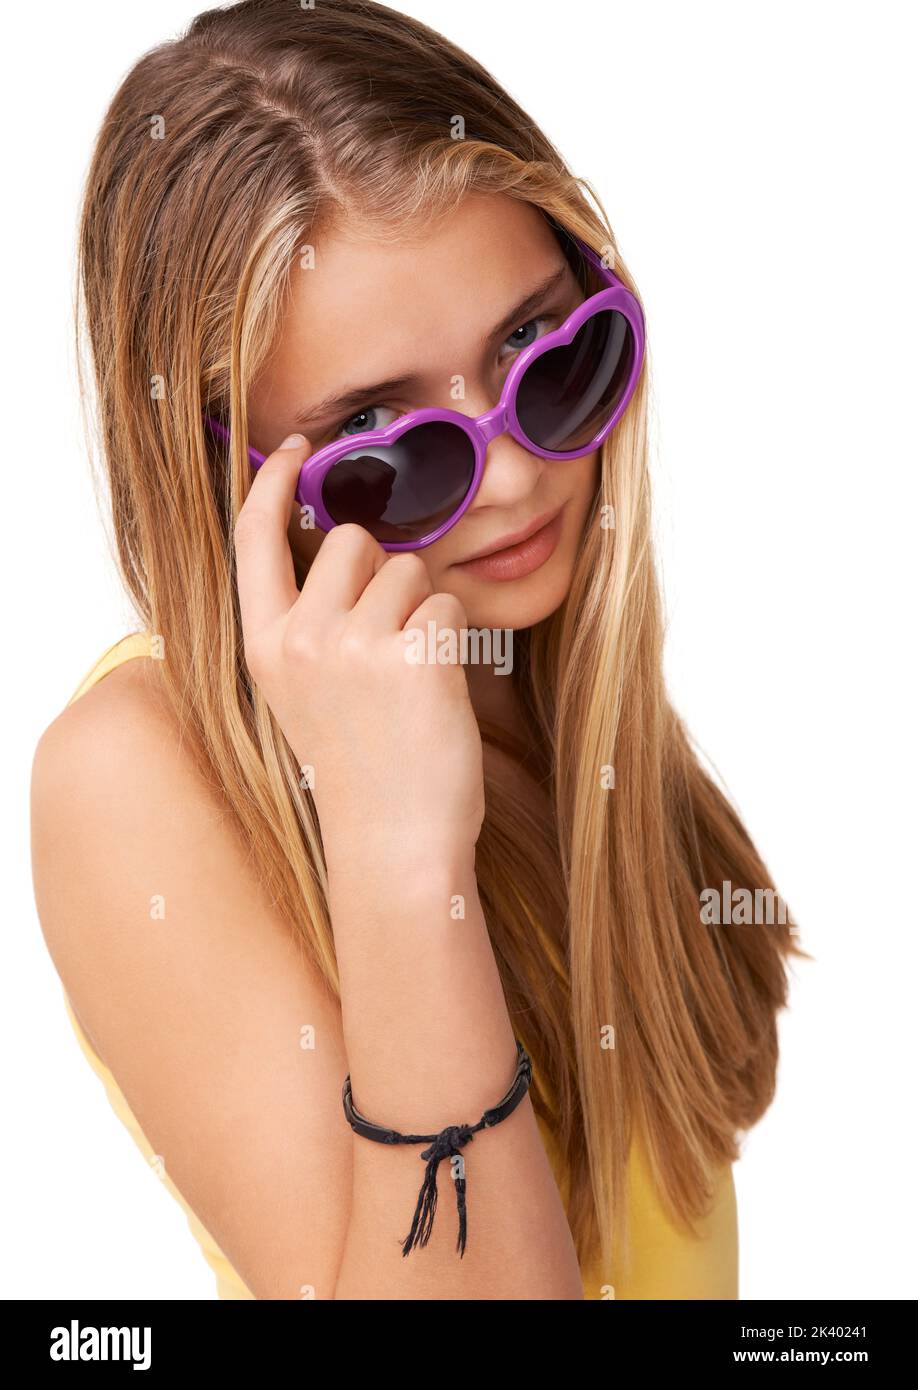 Peering over at you. Portrait of a cute teen girl peering over her heart-shaped glasses. Stock Photo